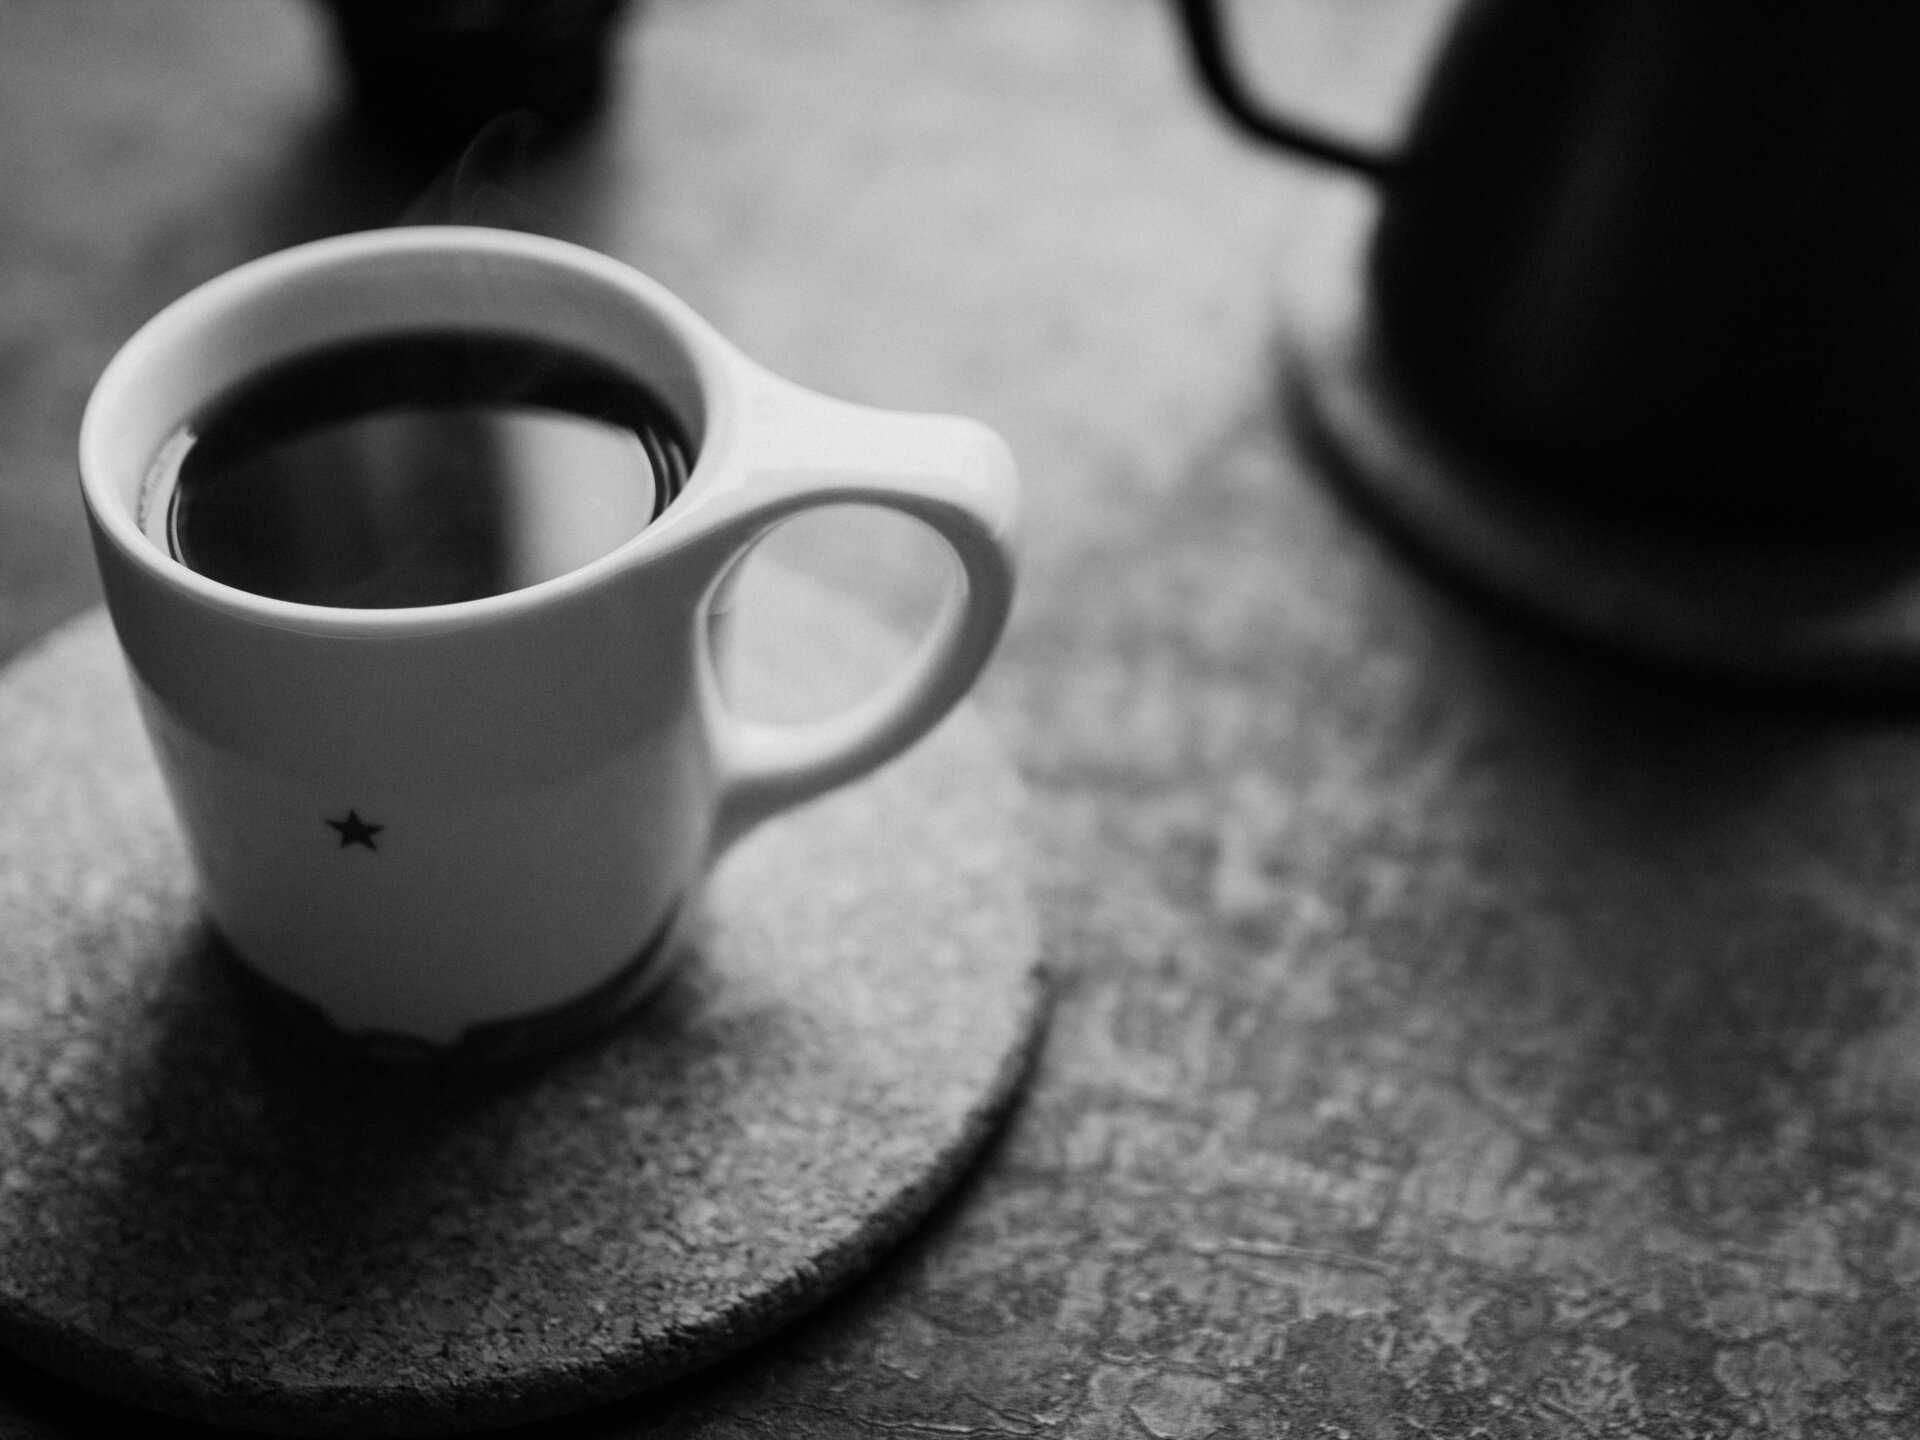 A white cup of black coffee sits on a cork mat on a table next to a kettle